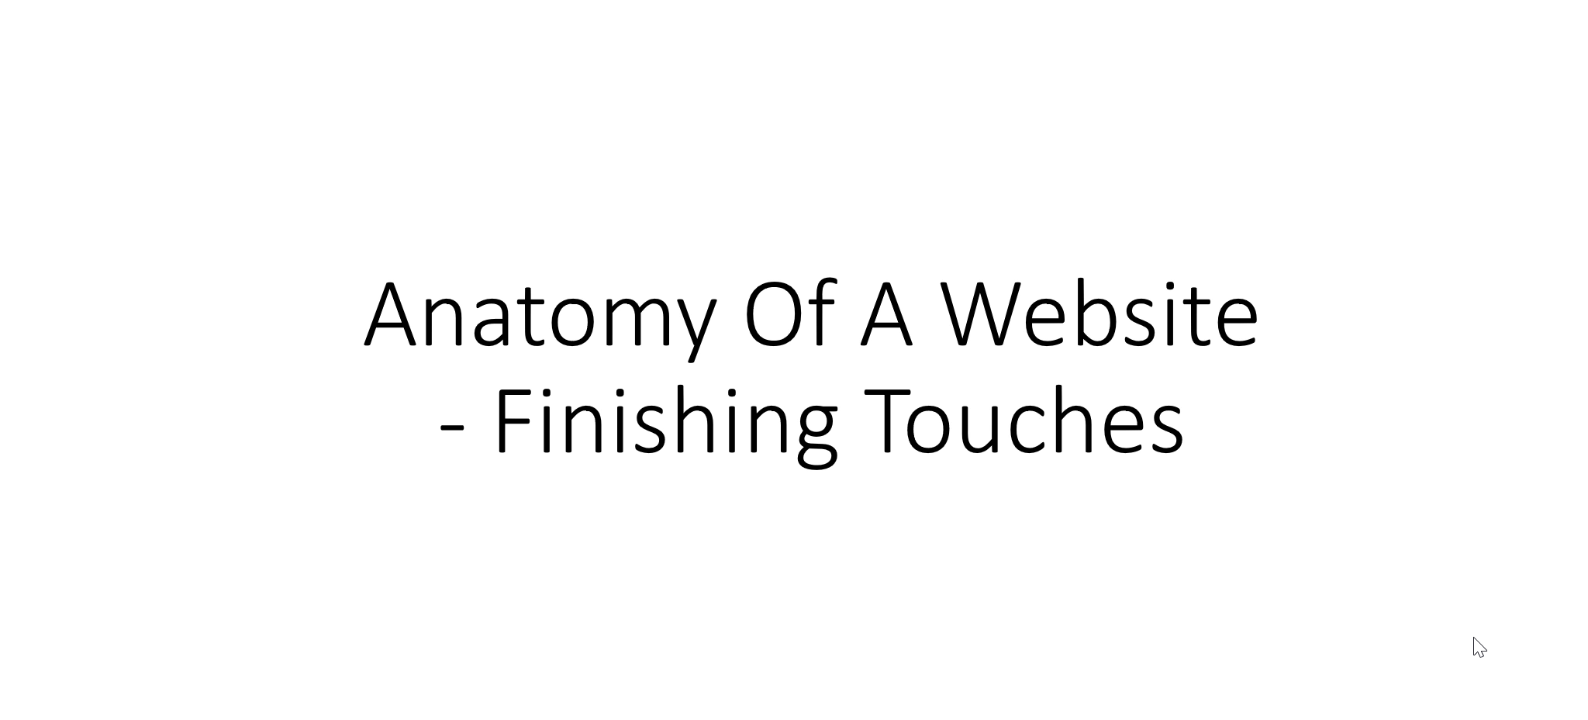 9. Anatomy Of A Website – Finishing Touches